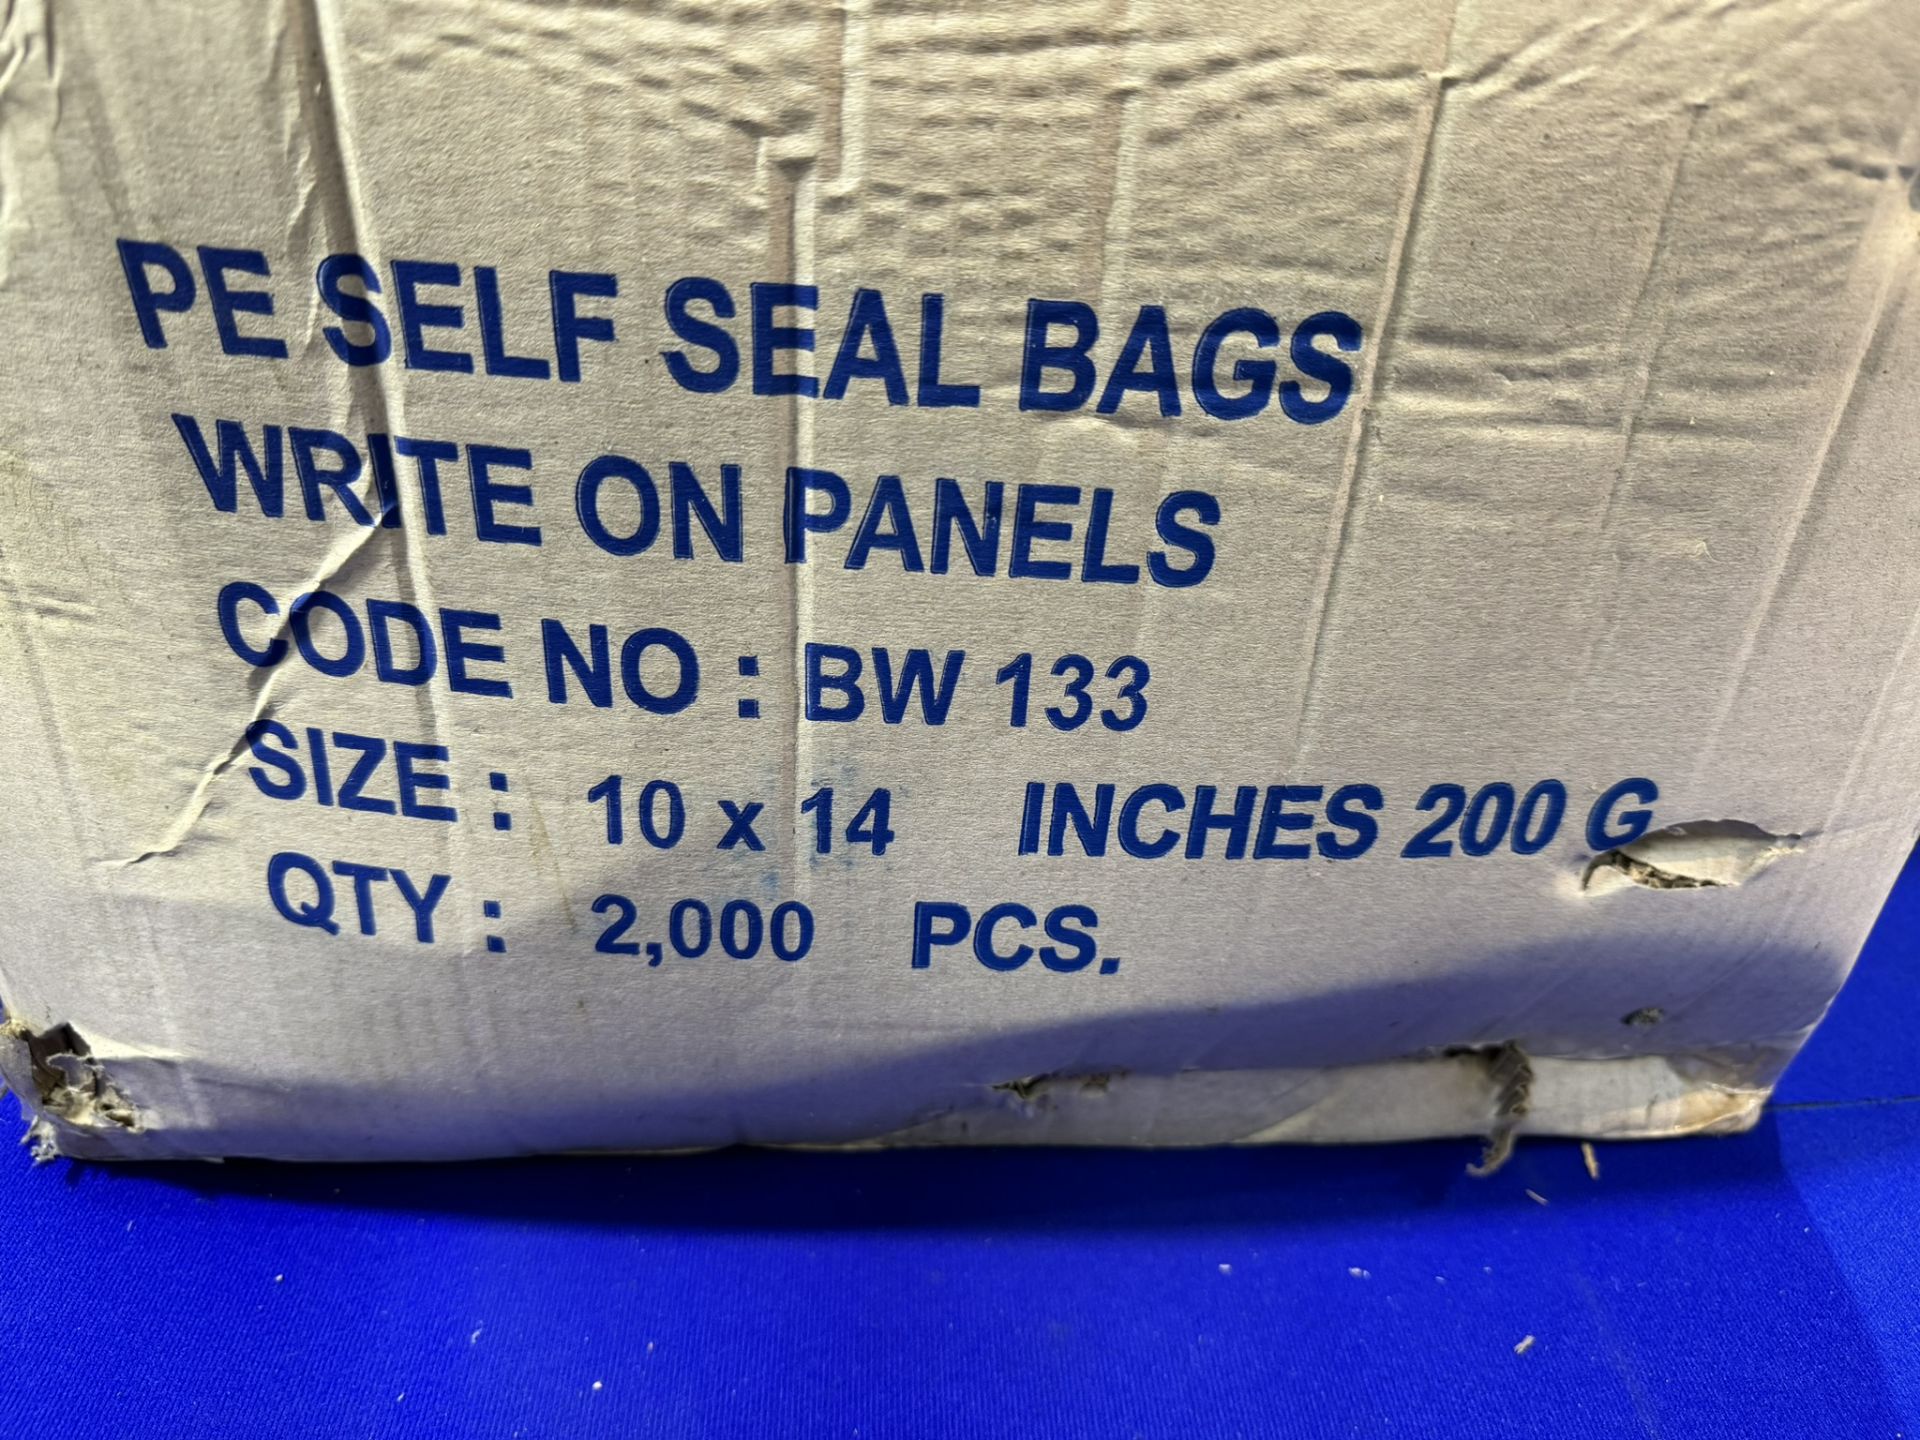 3 x Boxes Of Unbranded Plain Self Seal Bags - As Pictured - Image 2 of 4